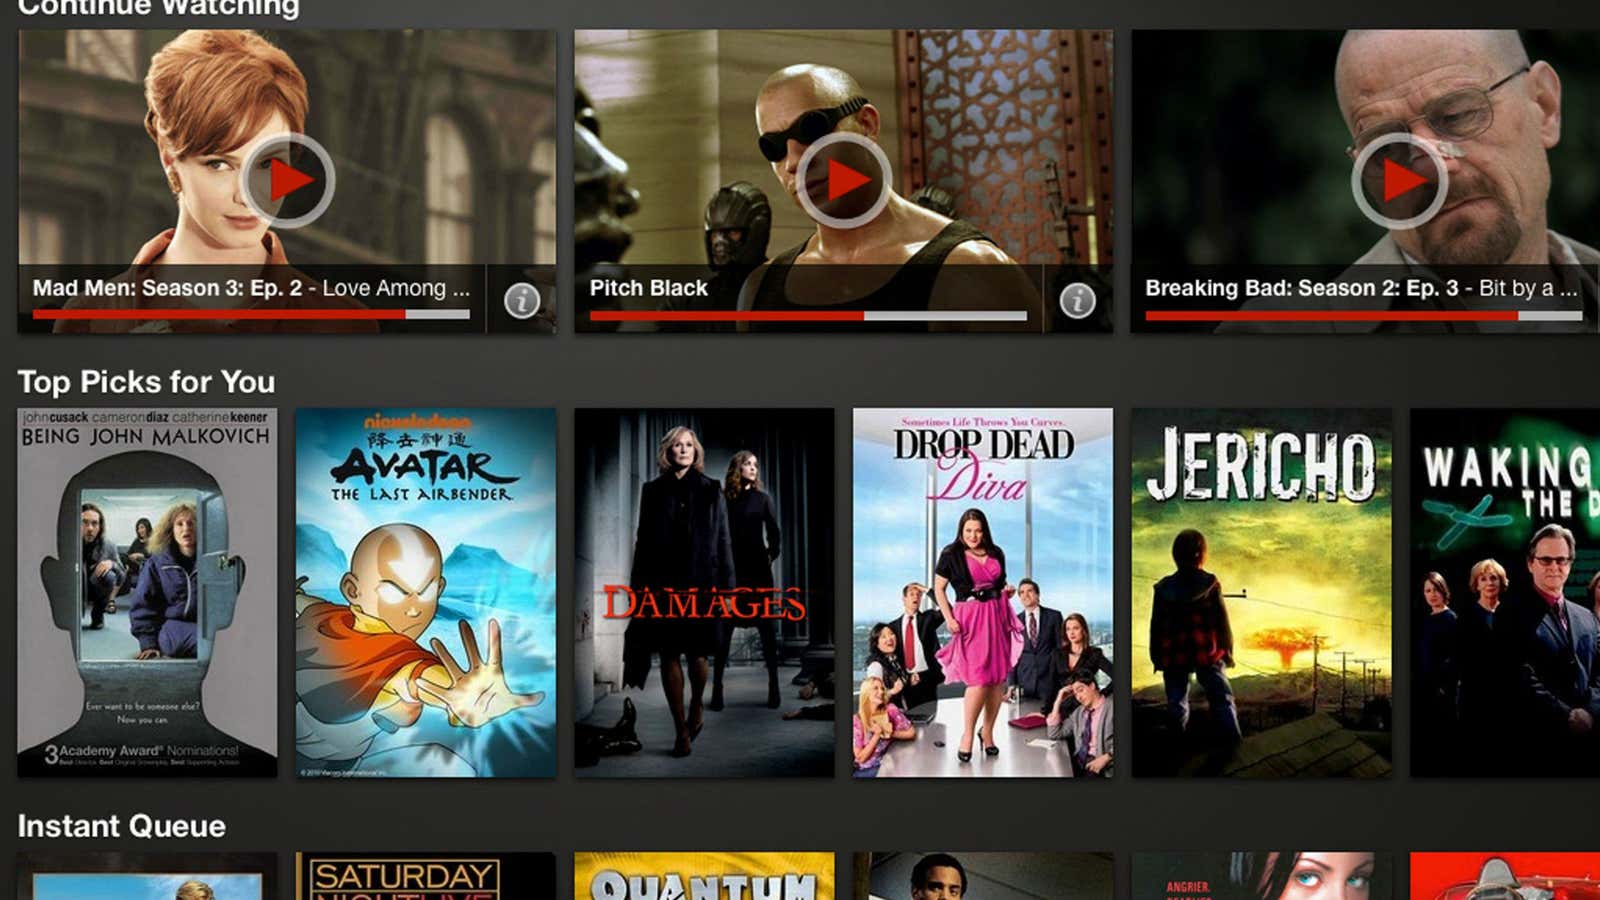 The streaming service is updating its recommendation systems to keep you stick around.